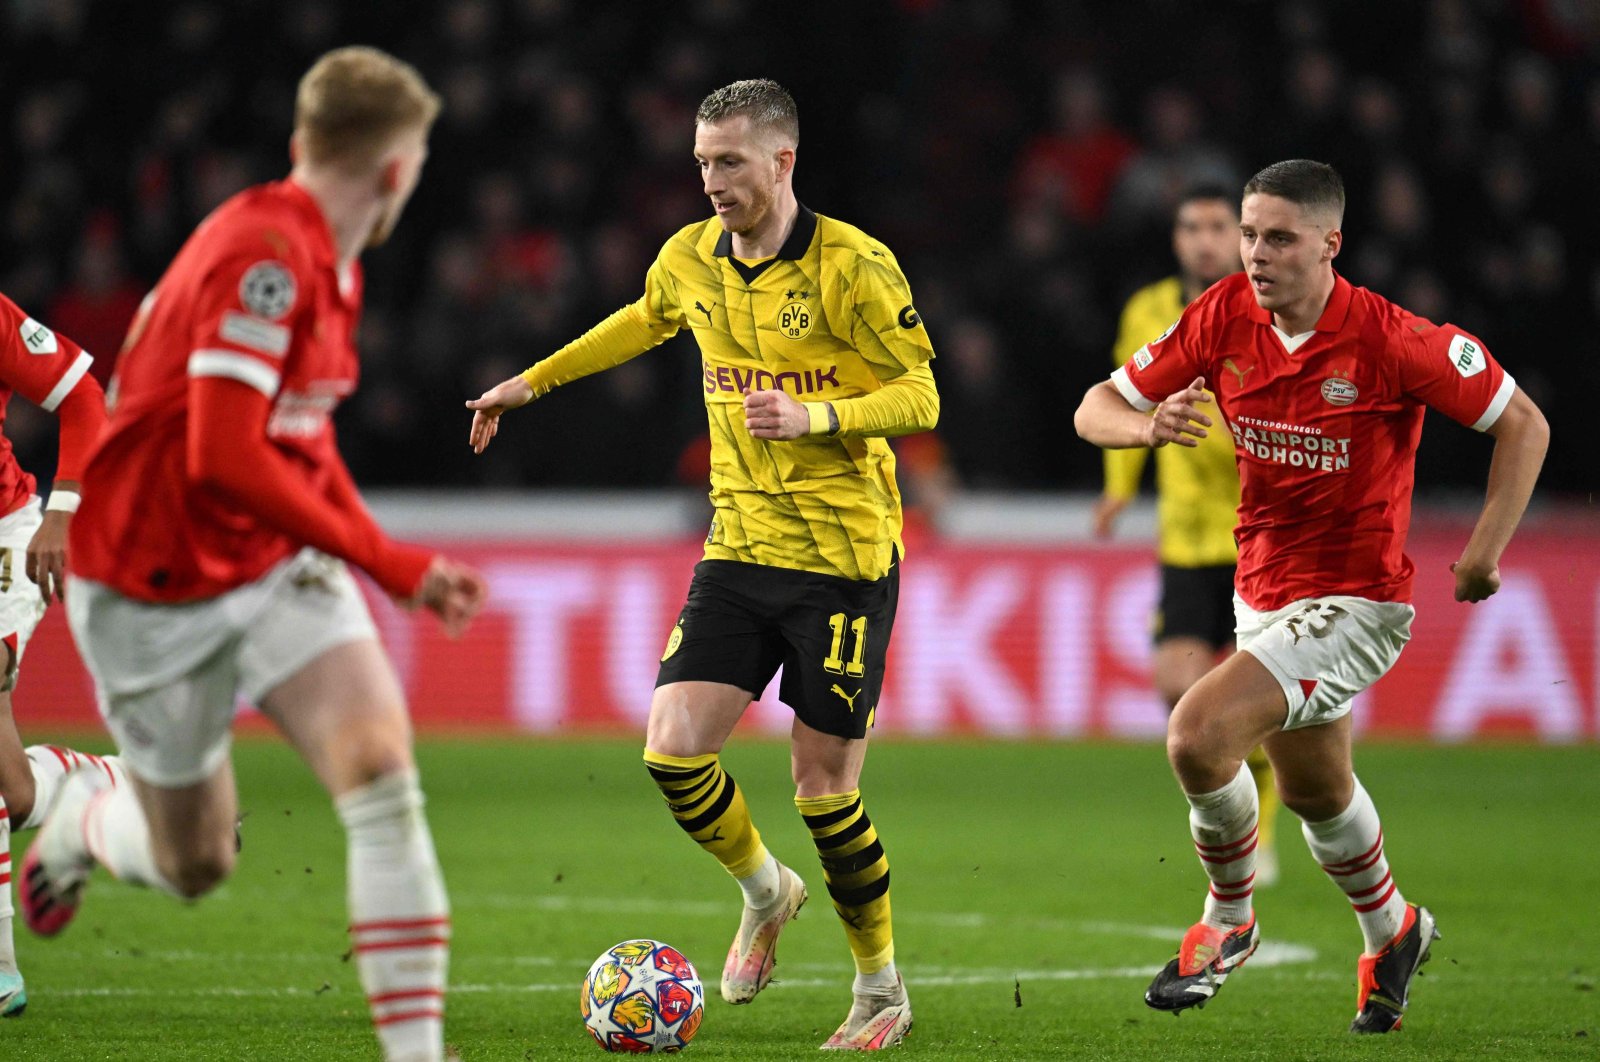 Borussia Dortmund&#039;s Marco Reus (C) plays the ball chased by PSV&#039;s Joey Veerman during the UEFA Champions League round of 16, first leg football match at the Philips Stadium, Eindhoven, Netherlands, Feb. 20, 2024. (AFP Photo)